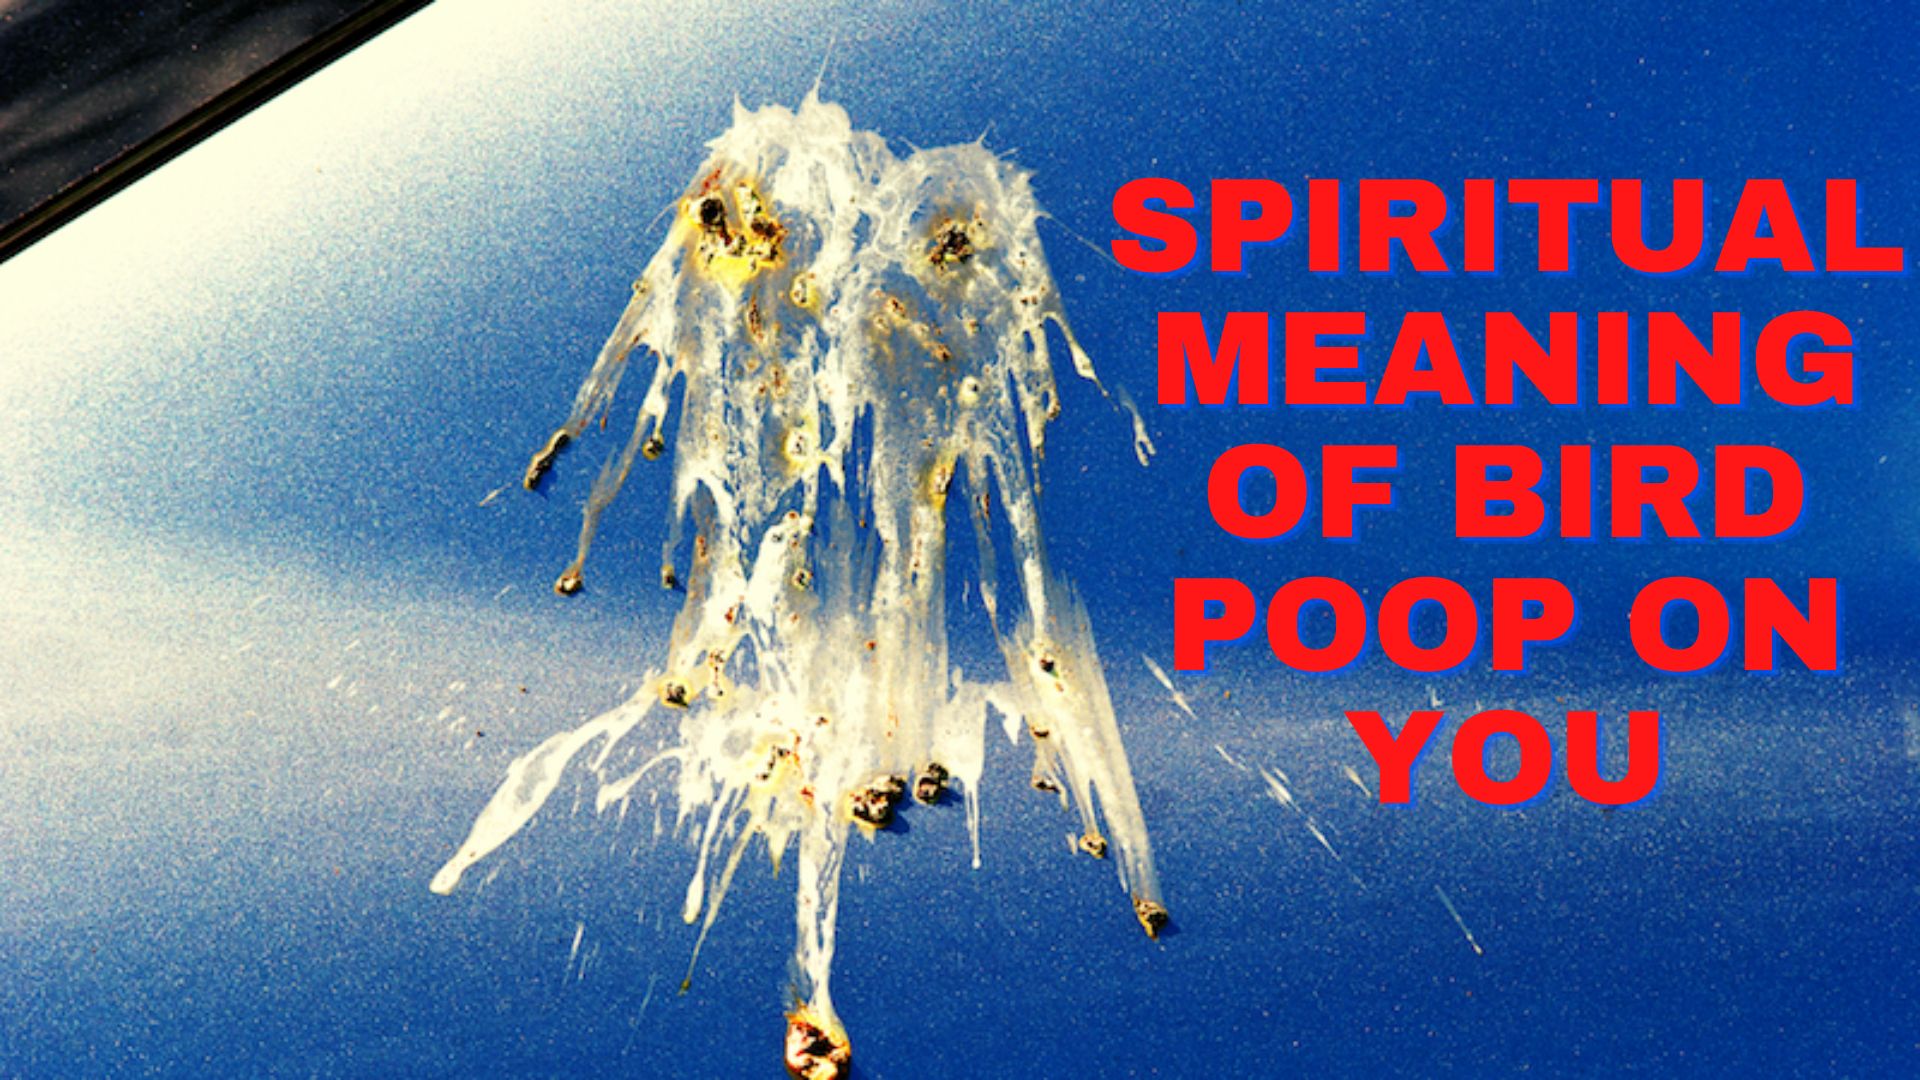 Spiritual Meaning Of Bird Poop On You - A Sign Of Good Luck